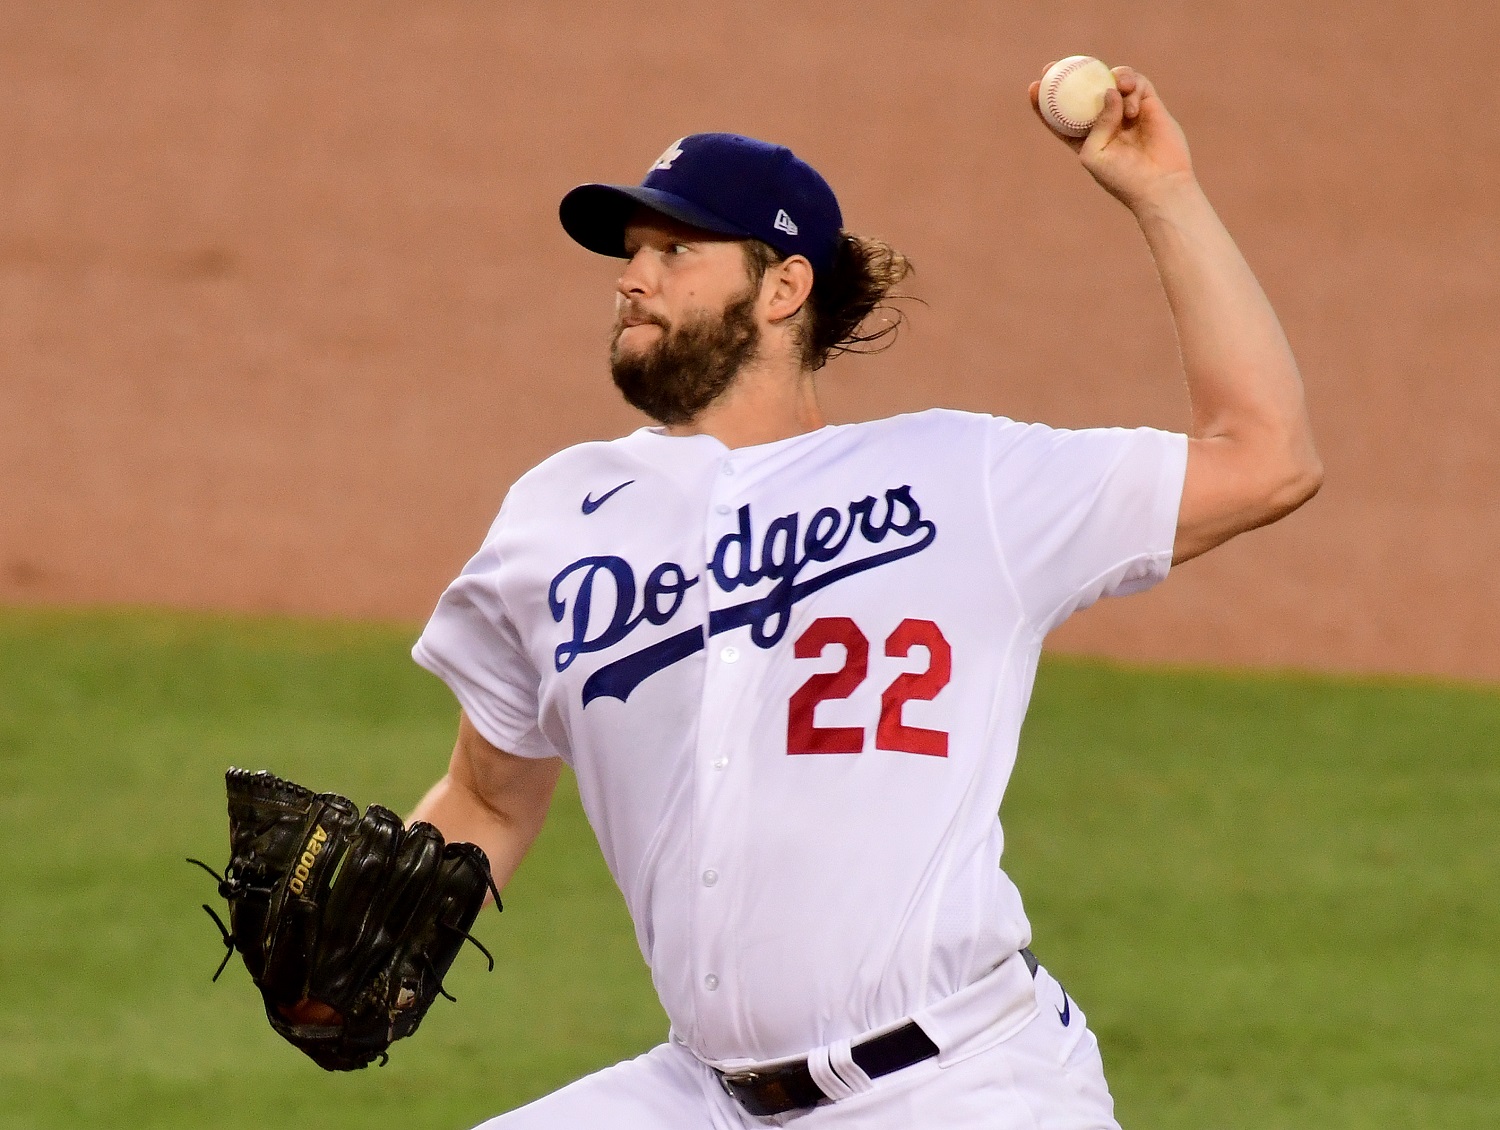 Dodgers Ace Clayton Kershaw Owns an MLB Record That Doesn’t Make Any Sense